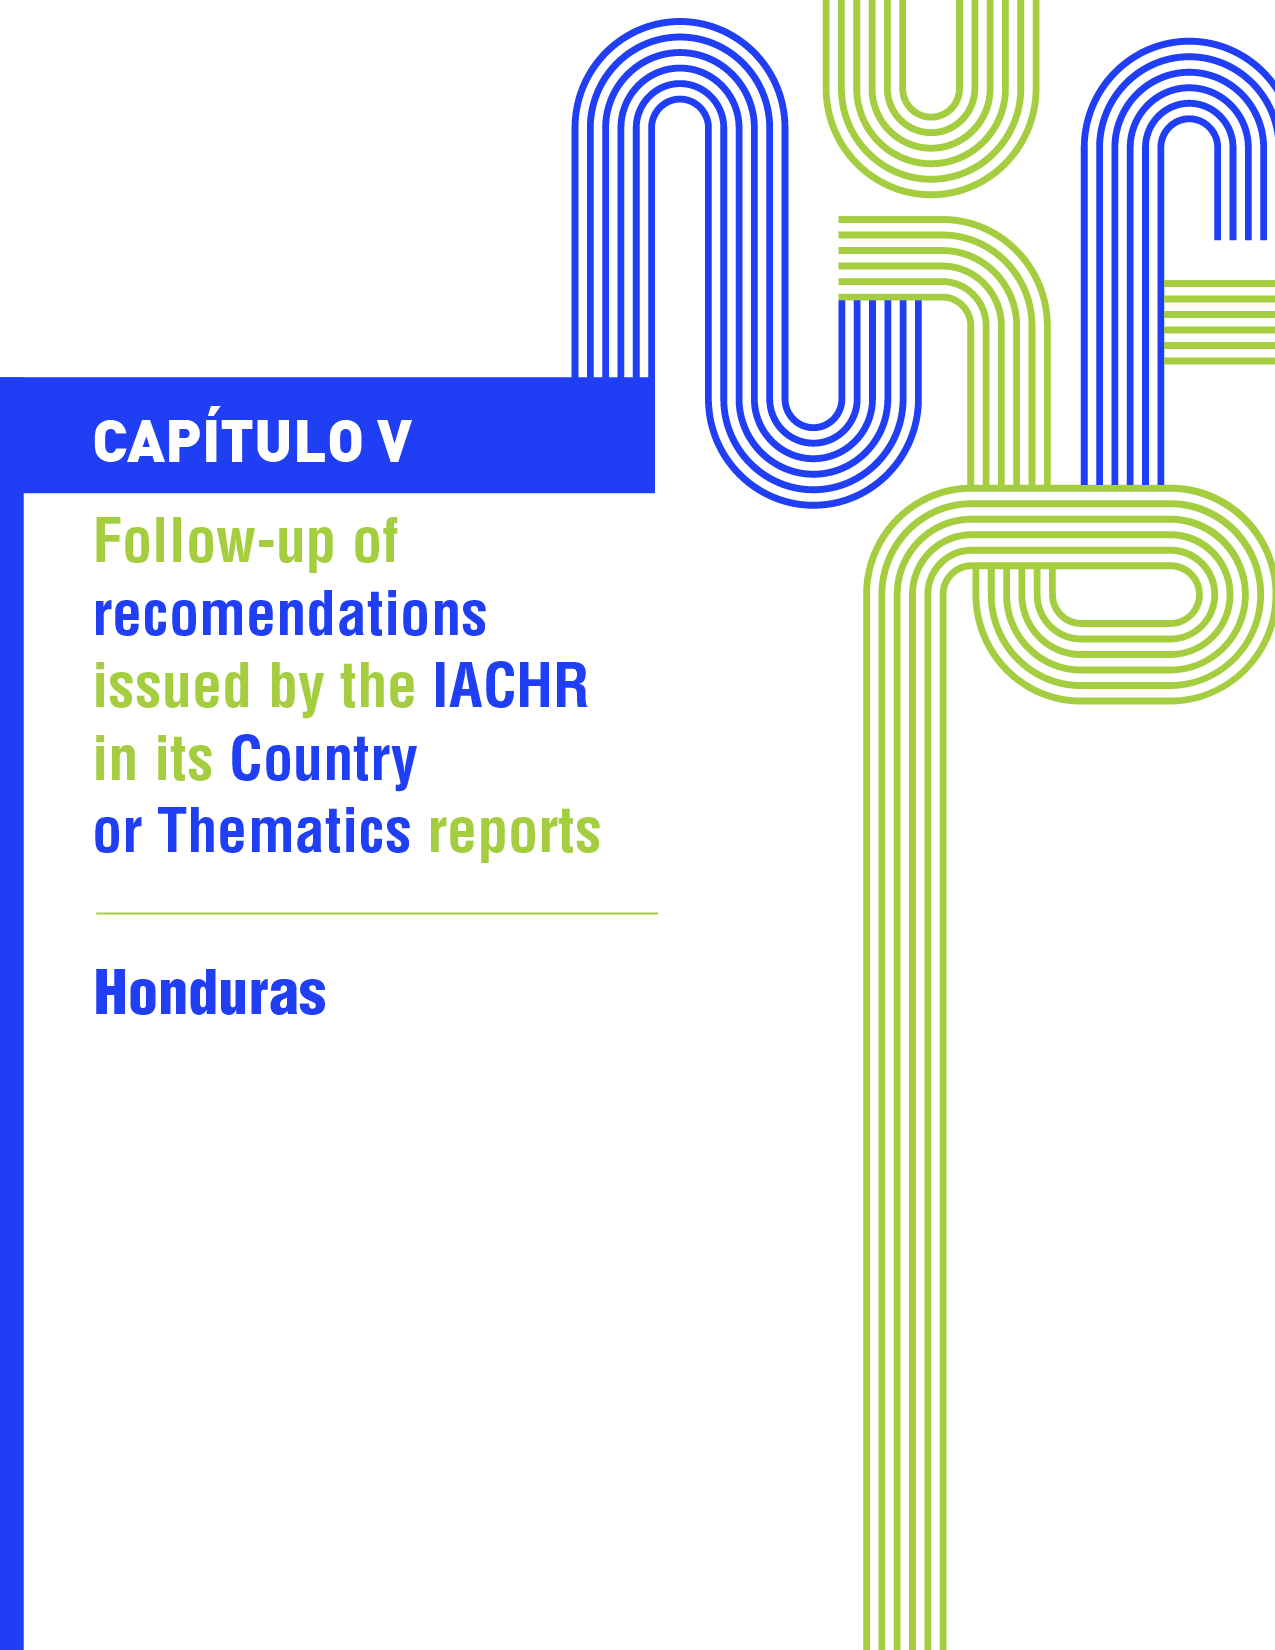 Third report on the follow-up of recommendations made by the IACHR in its report on the situation of human rights in Honduras